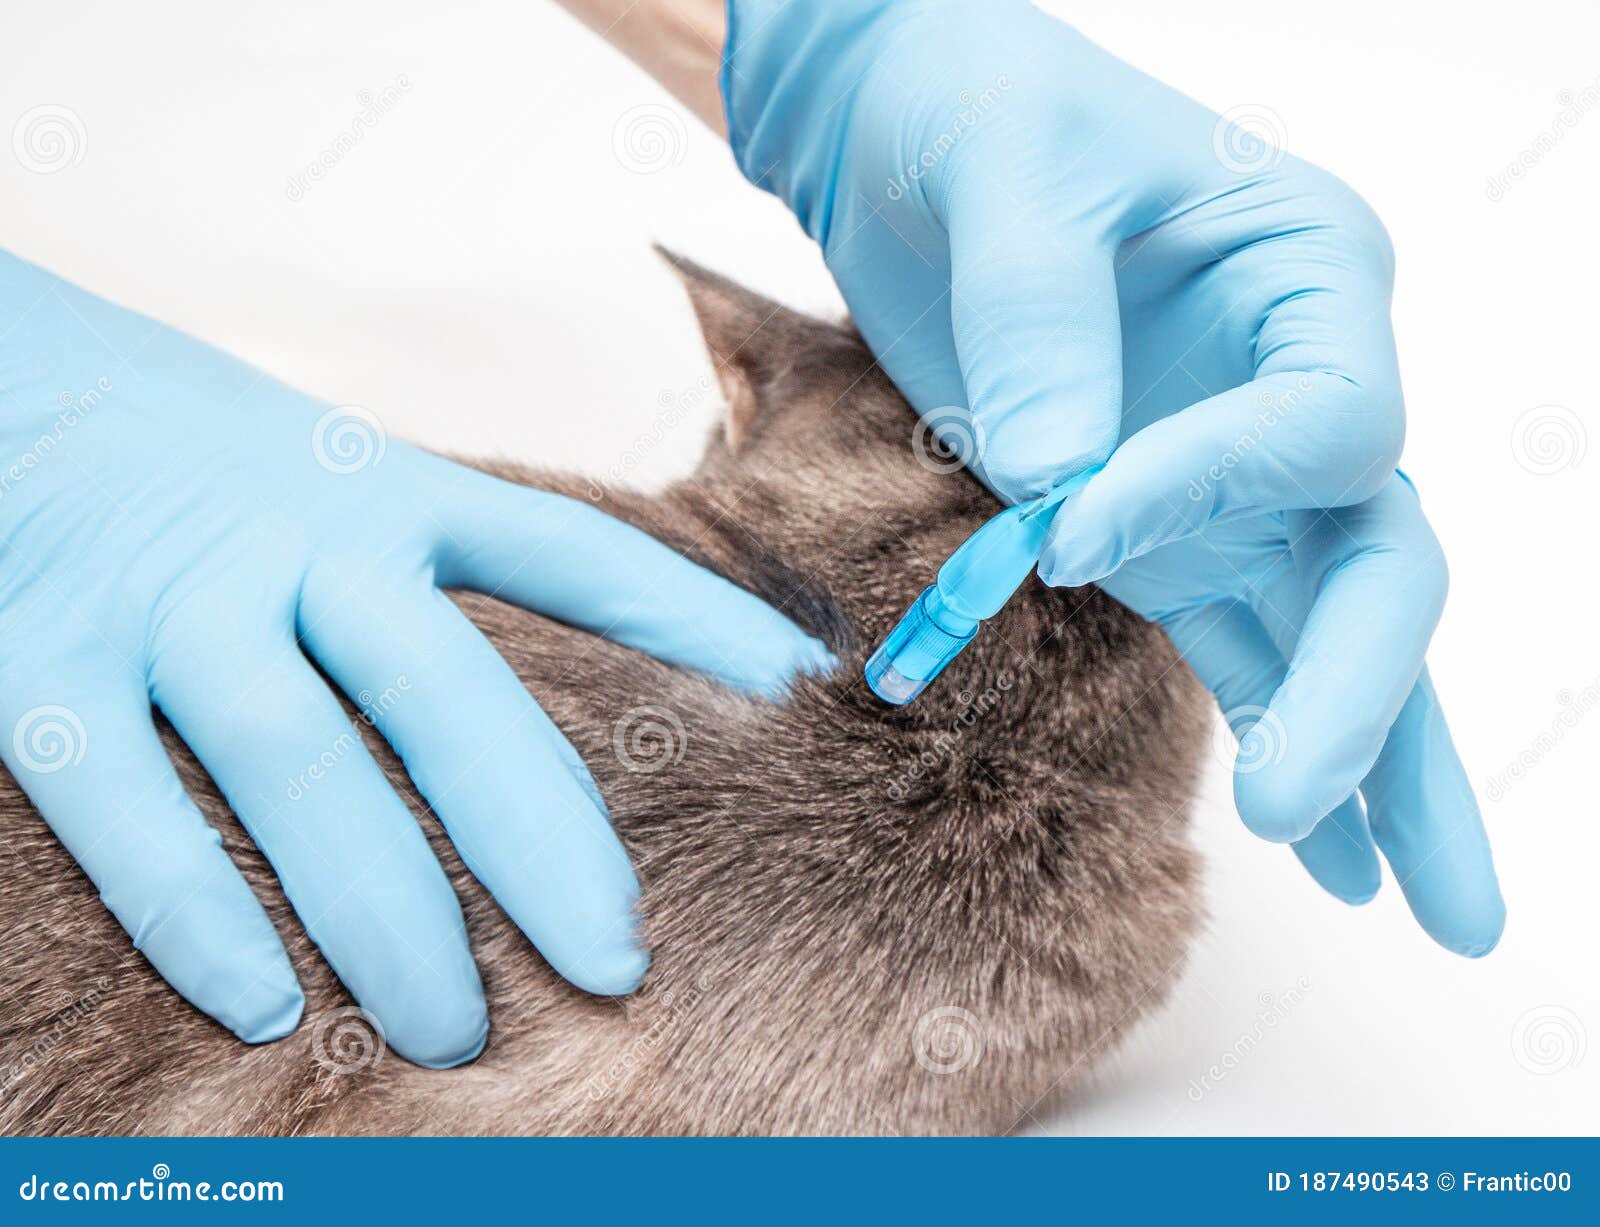 veterinarian applies antiparasitic drops medicine on the back of the cat`s neck